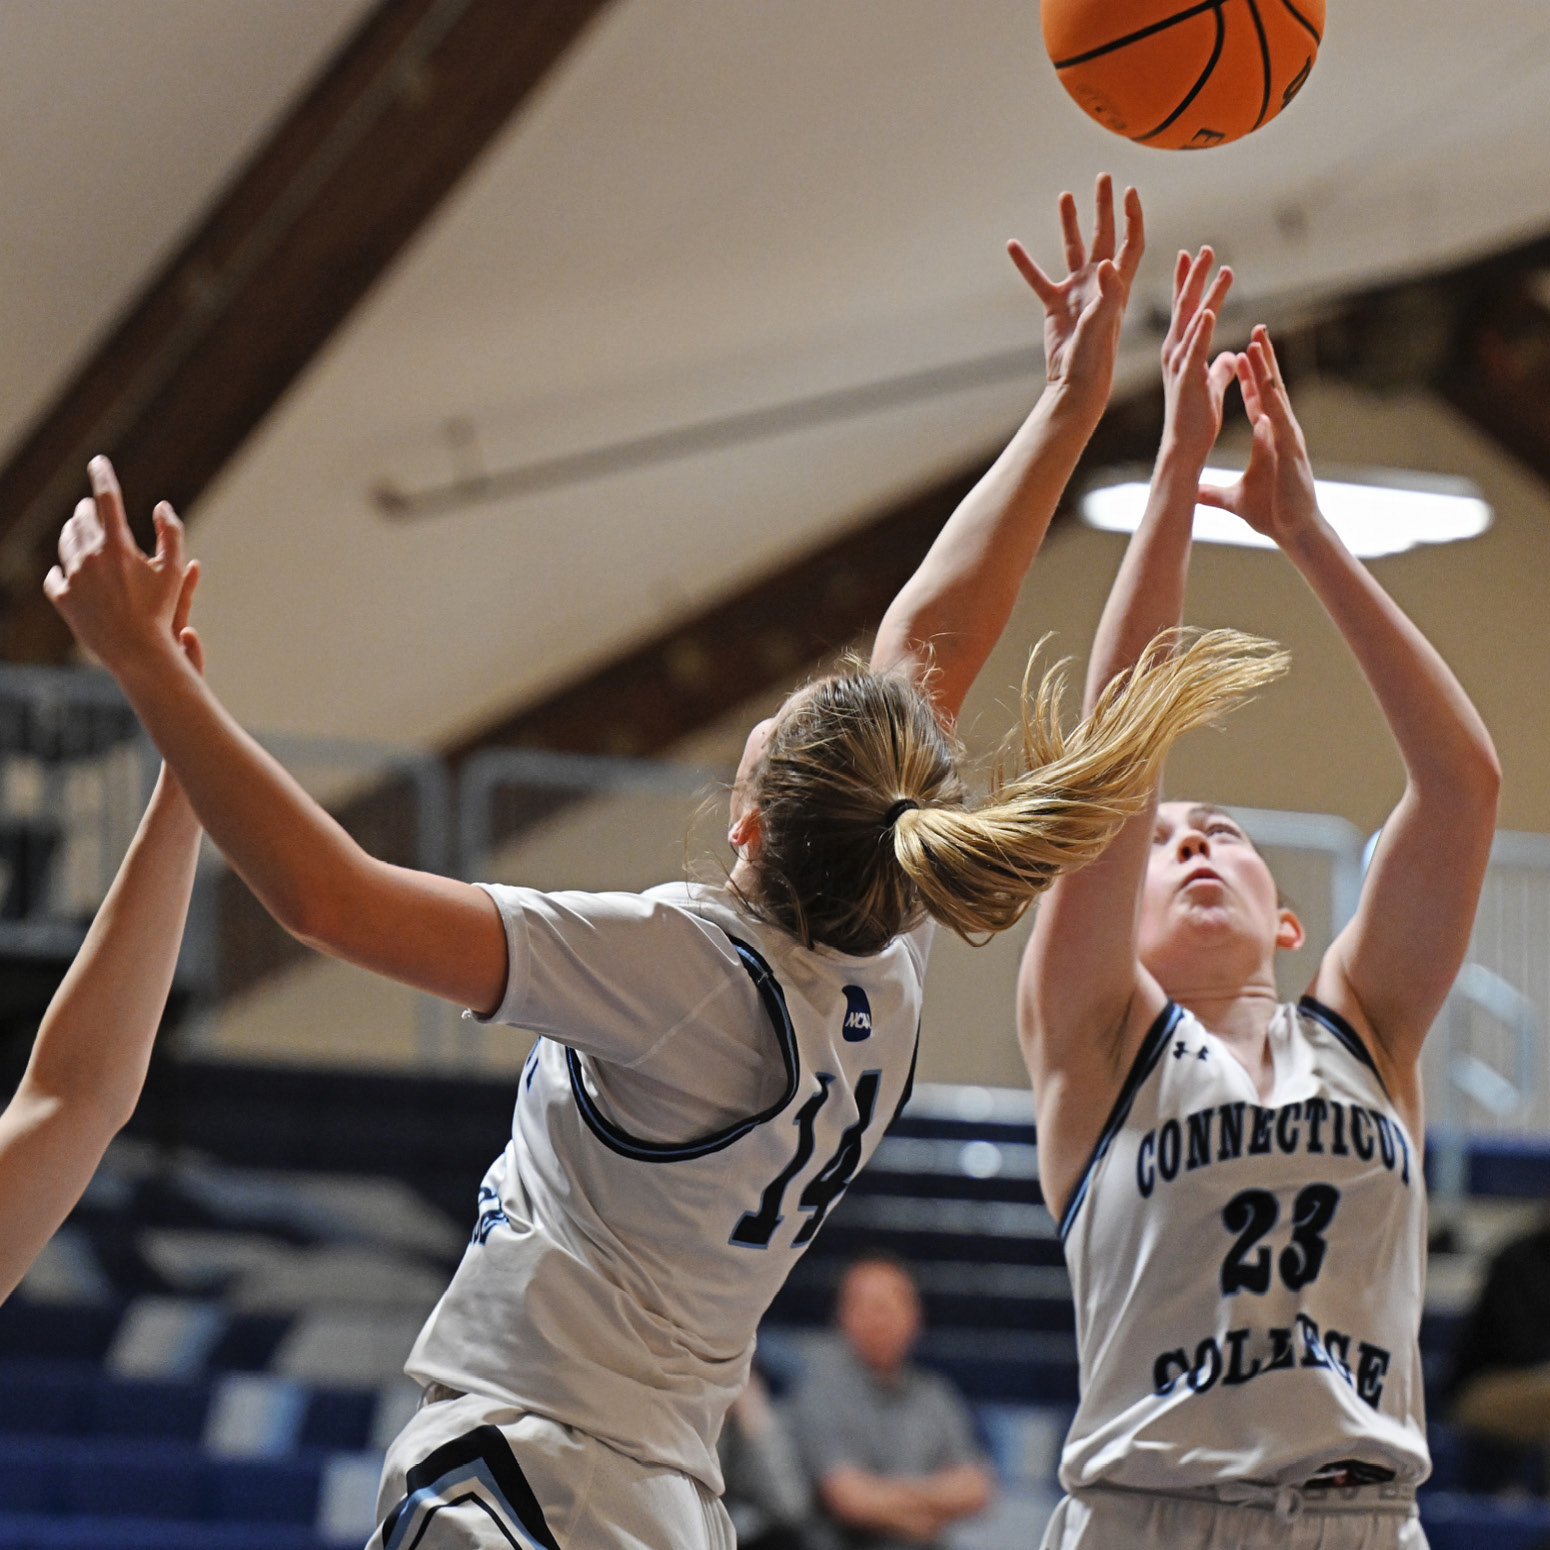 Two women's basketball players jump for a rebound